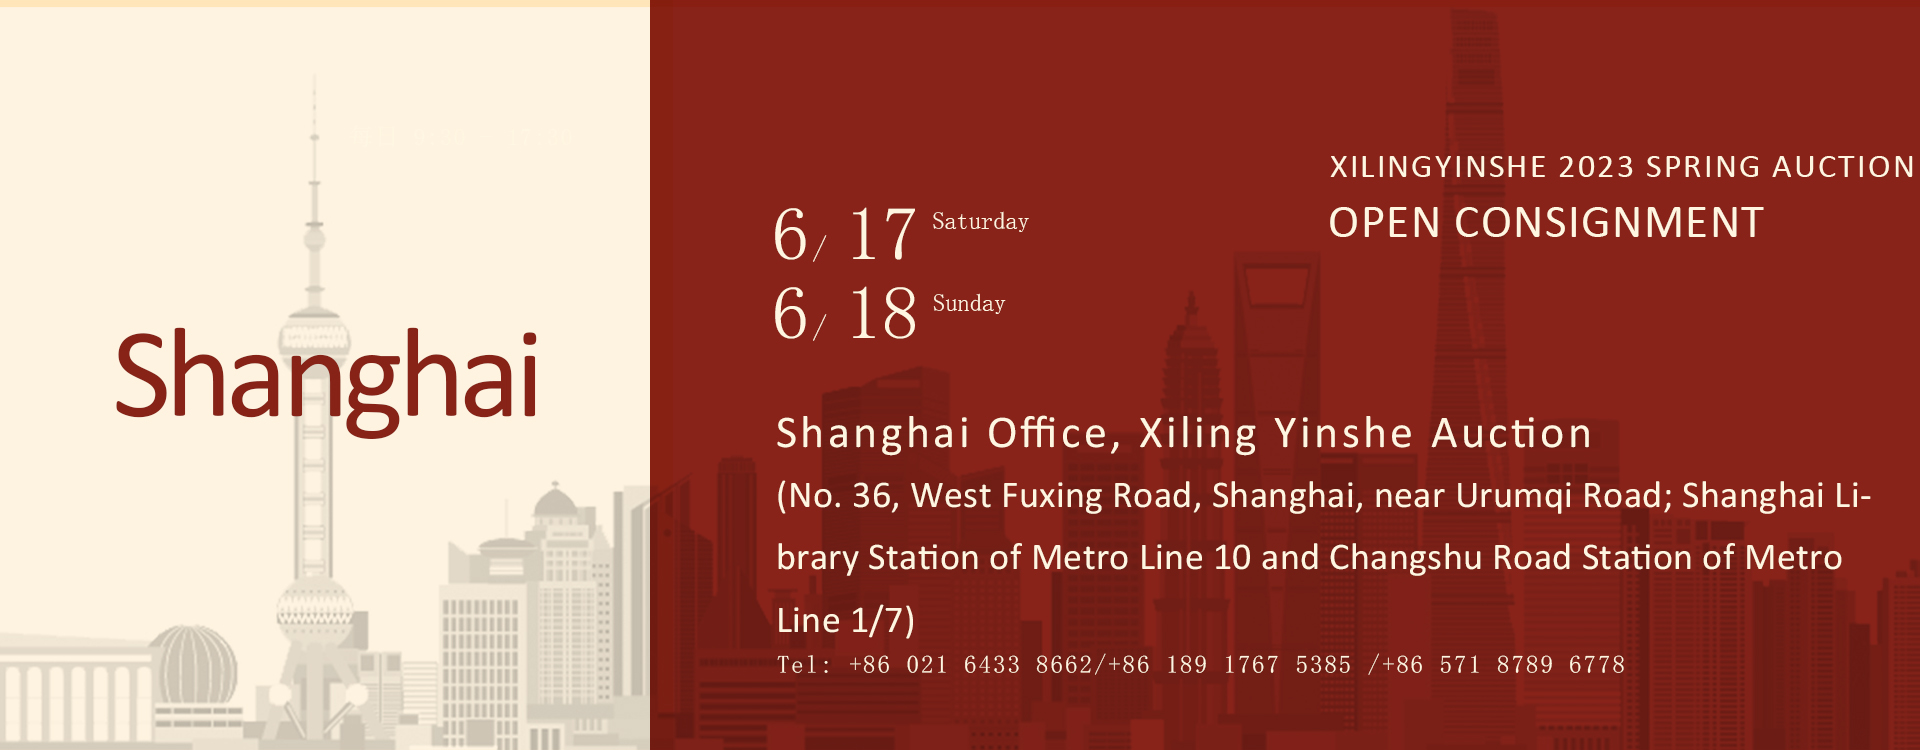 Xiling Yinshe 2023 Spring Auction Consignment in Shanghai